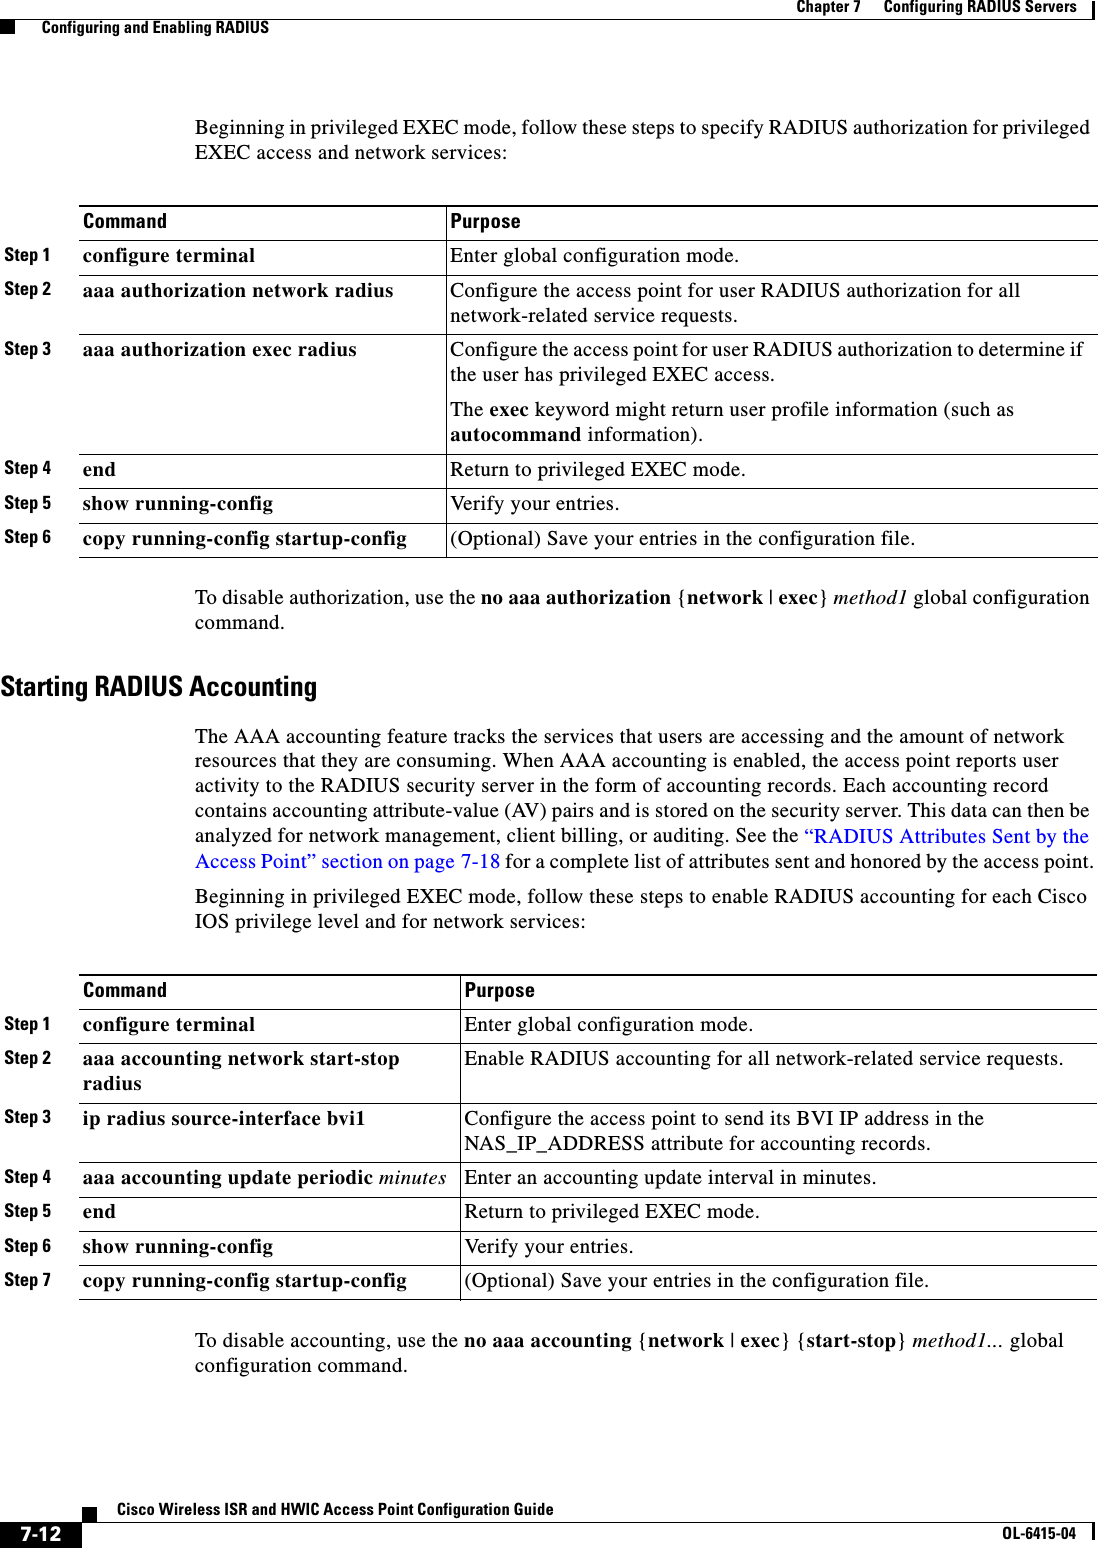  7-12Cisco Wireless ISR and HWIC Access Point Configuration GuideOL-6415-04Chapter 7      Configuring RADIUS Servers  Configuring and Enabling RADIUSBeginning in privileged EXEC mode, follow these steps to specify RADIUS authorization for privileged EXEC access and network services: To disable authorization, use the no aaa authorization {network | exec} method1 global configuration command. Starting RADIUS AccountingThe AAA accounting feature tracks the services that users are accessing and the amount of network resources that they are consuming. When AAA accounting is enabled, the access point reports user activity to the RADIUS security server in the form of accounting records. Each accounting record contains accounting attribute-value (AV) pairs and is stored on the security server. This data can then be analyzed for network management, client billing, or auditing. See the “RADIUS Attributes Sent by the Access Point” section on page 7-18 for a complete list of attributes sent and honored by the access point.Beginning in privileged EXEC mode, follow these steps to enable RADIUS accounting for each Cisco IOS privilege level and for network services:To disable accounting, use the no aaa accounting {network | exec} {start-stop} method1... global configuration command.Command PurposeStep 1 configure terminal Enter global configuration mode.Step 2 aaa authorization network radius Configure the access point for user RADIUS authorization for all network-related service requests.Step 3 aaa authorization exec radius Configure the access point for user RADIUS authorization to determine if the user has privileged EXEC access. The exec keyword might return user profile information (such as autocommand information). Step 4 end Return to privileged EXEC mode.Step 5 show running-config Ver i fy  y ou r  e n tr ie s .Step 6 copy running-config startup-config (Optional) Save your entries in the configuration file.Command PurposeStep 1 configure terminal Enter global configuration mode.Step 2 aaa accounting network start-stop radiusEnable RADIUS accounting for all network-related service requests. Step 3 ip radius source-interface bvi1 Configure the access point to send its BVI IP address in the NAS_IP_ADDRESS attribute for accounting records.Step 4 aaa accounting update periodic minutes Enter an accounting update interval in minutes. Step 5 end Return to privileged EXEC mode.Step 6 show running-config Verify your entries.Step 7 copy running-config startup-config (Optional) Save your entries in the configuration file.